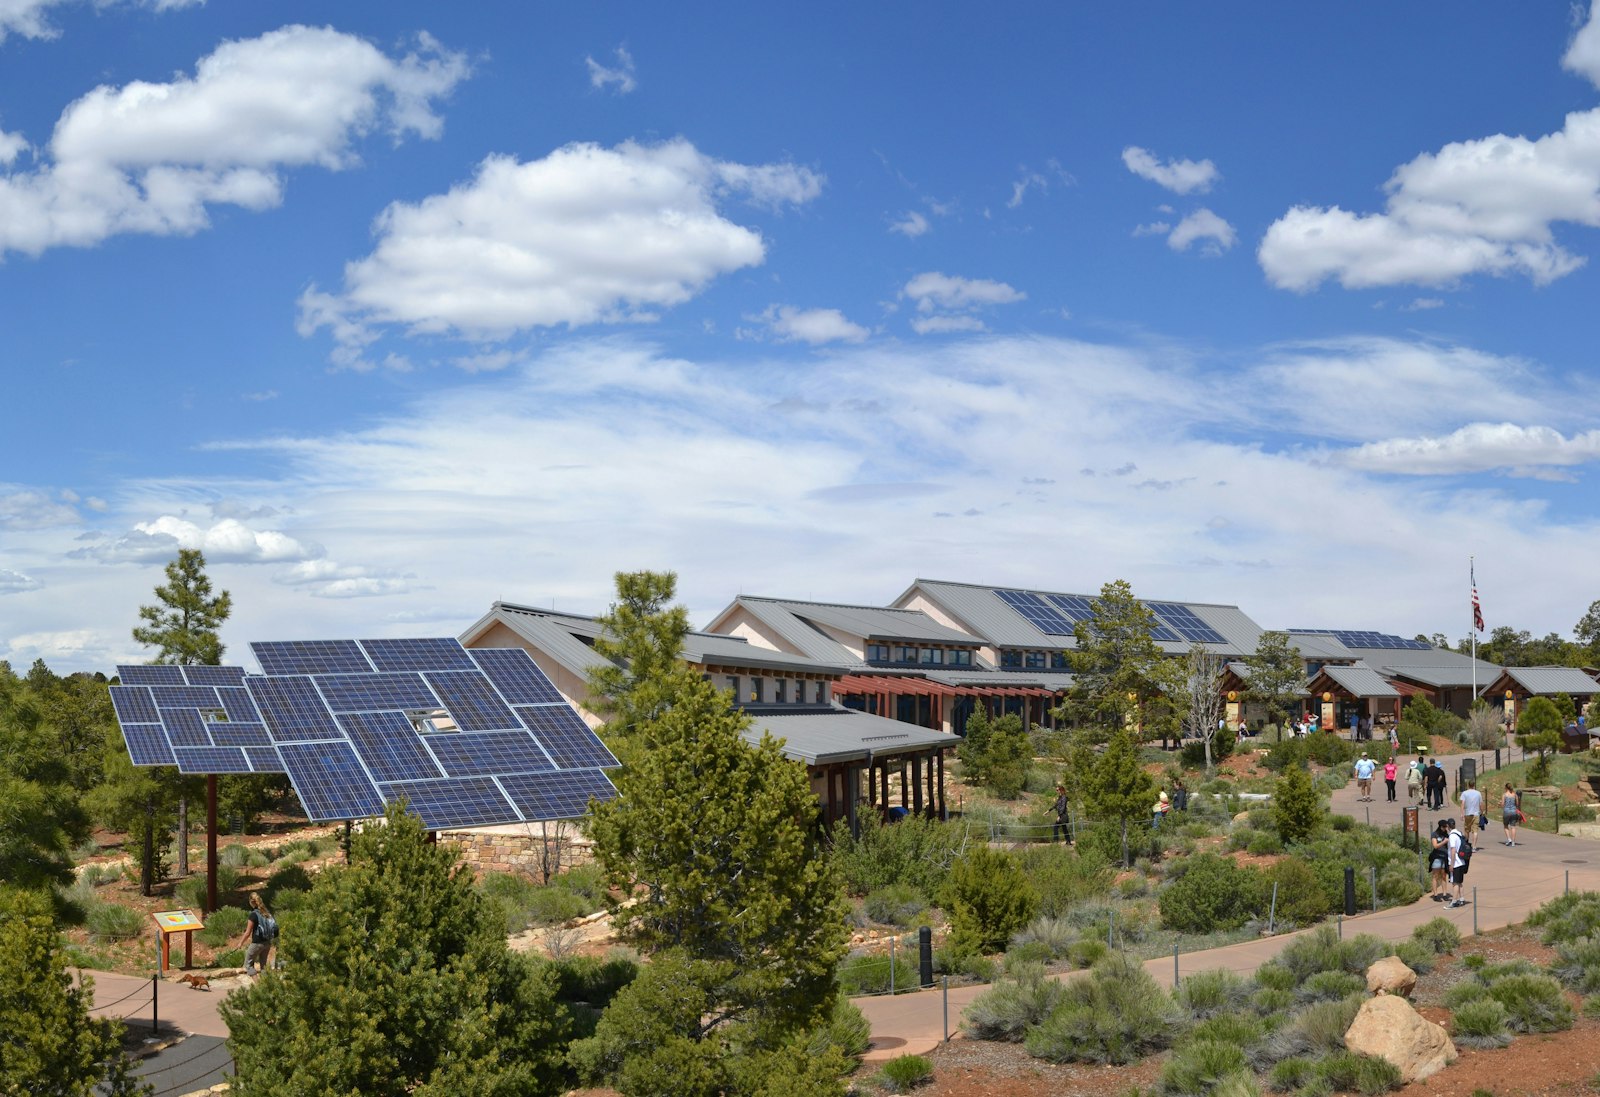 Solar panels installed outside a visitor center